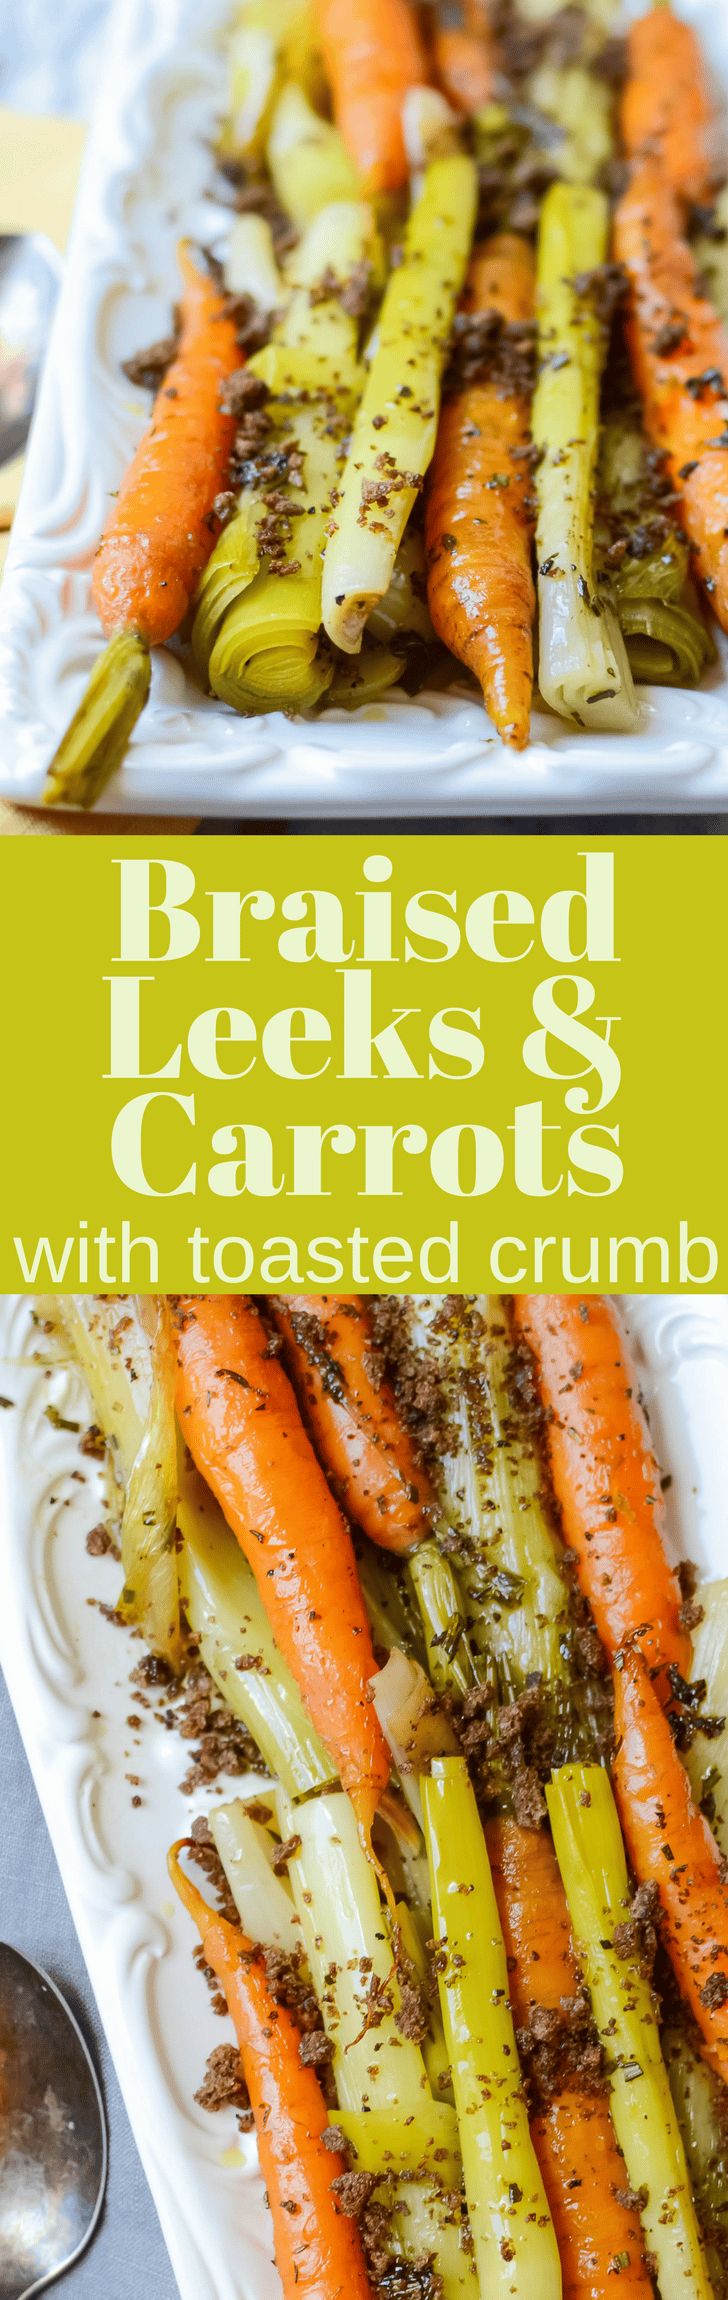 Need a healthy vegetarian side dish recipe? Braised Leeks and Carrots with Toasted Crumb is a simple way to amplify the vegetable's natural flavors.